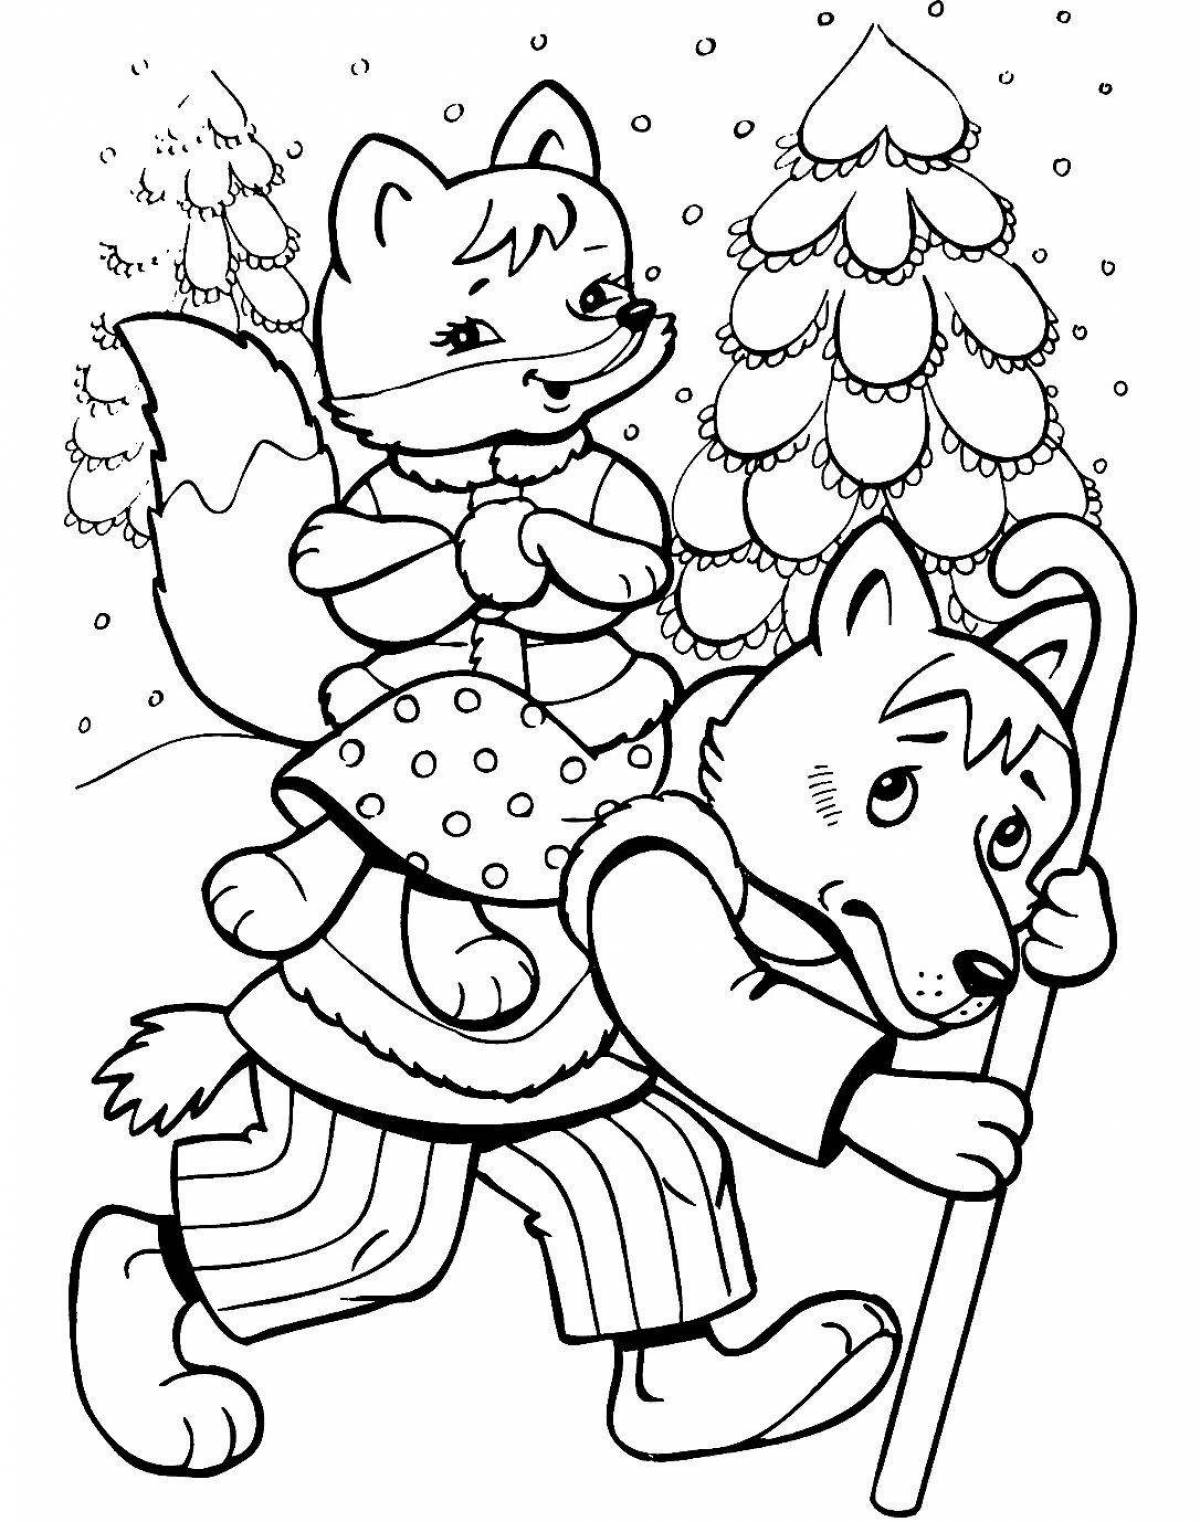 Adorable little fox and gray wolf coloring book